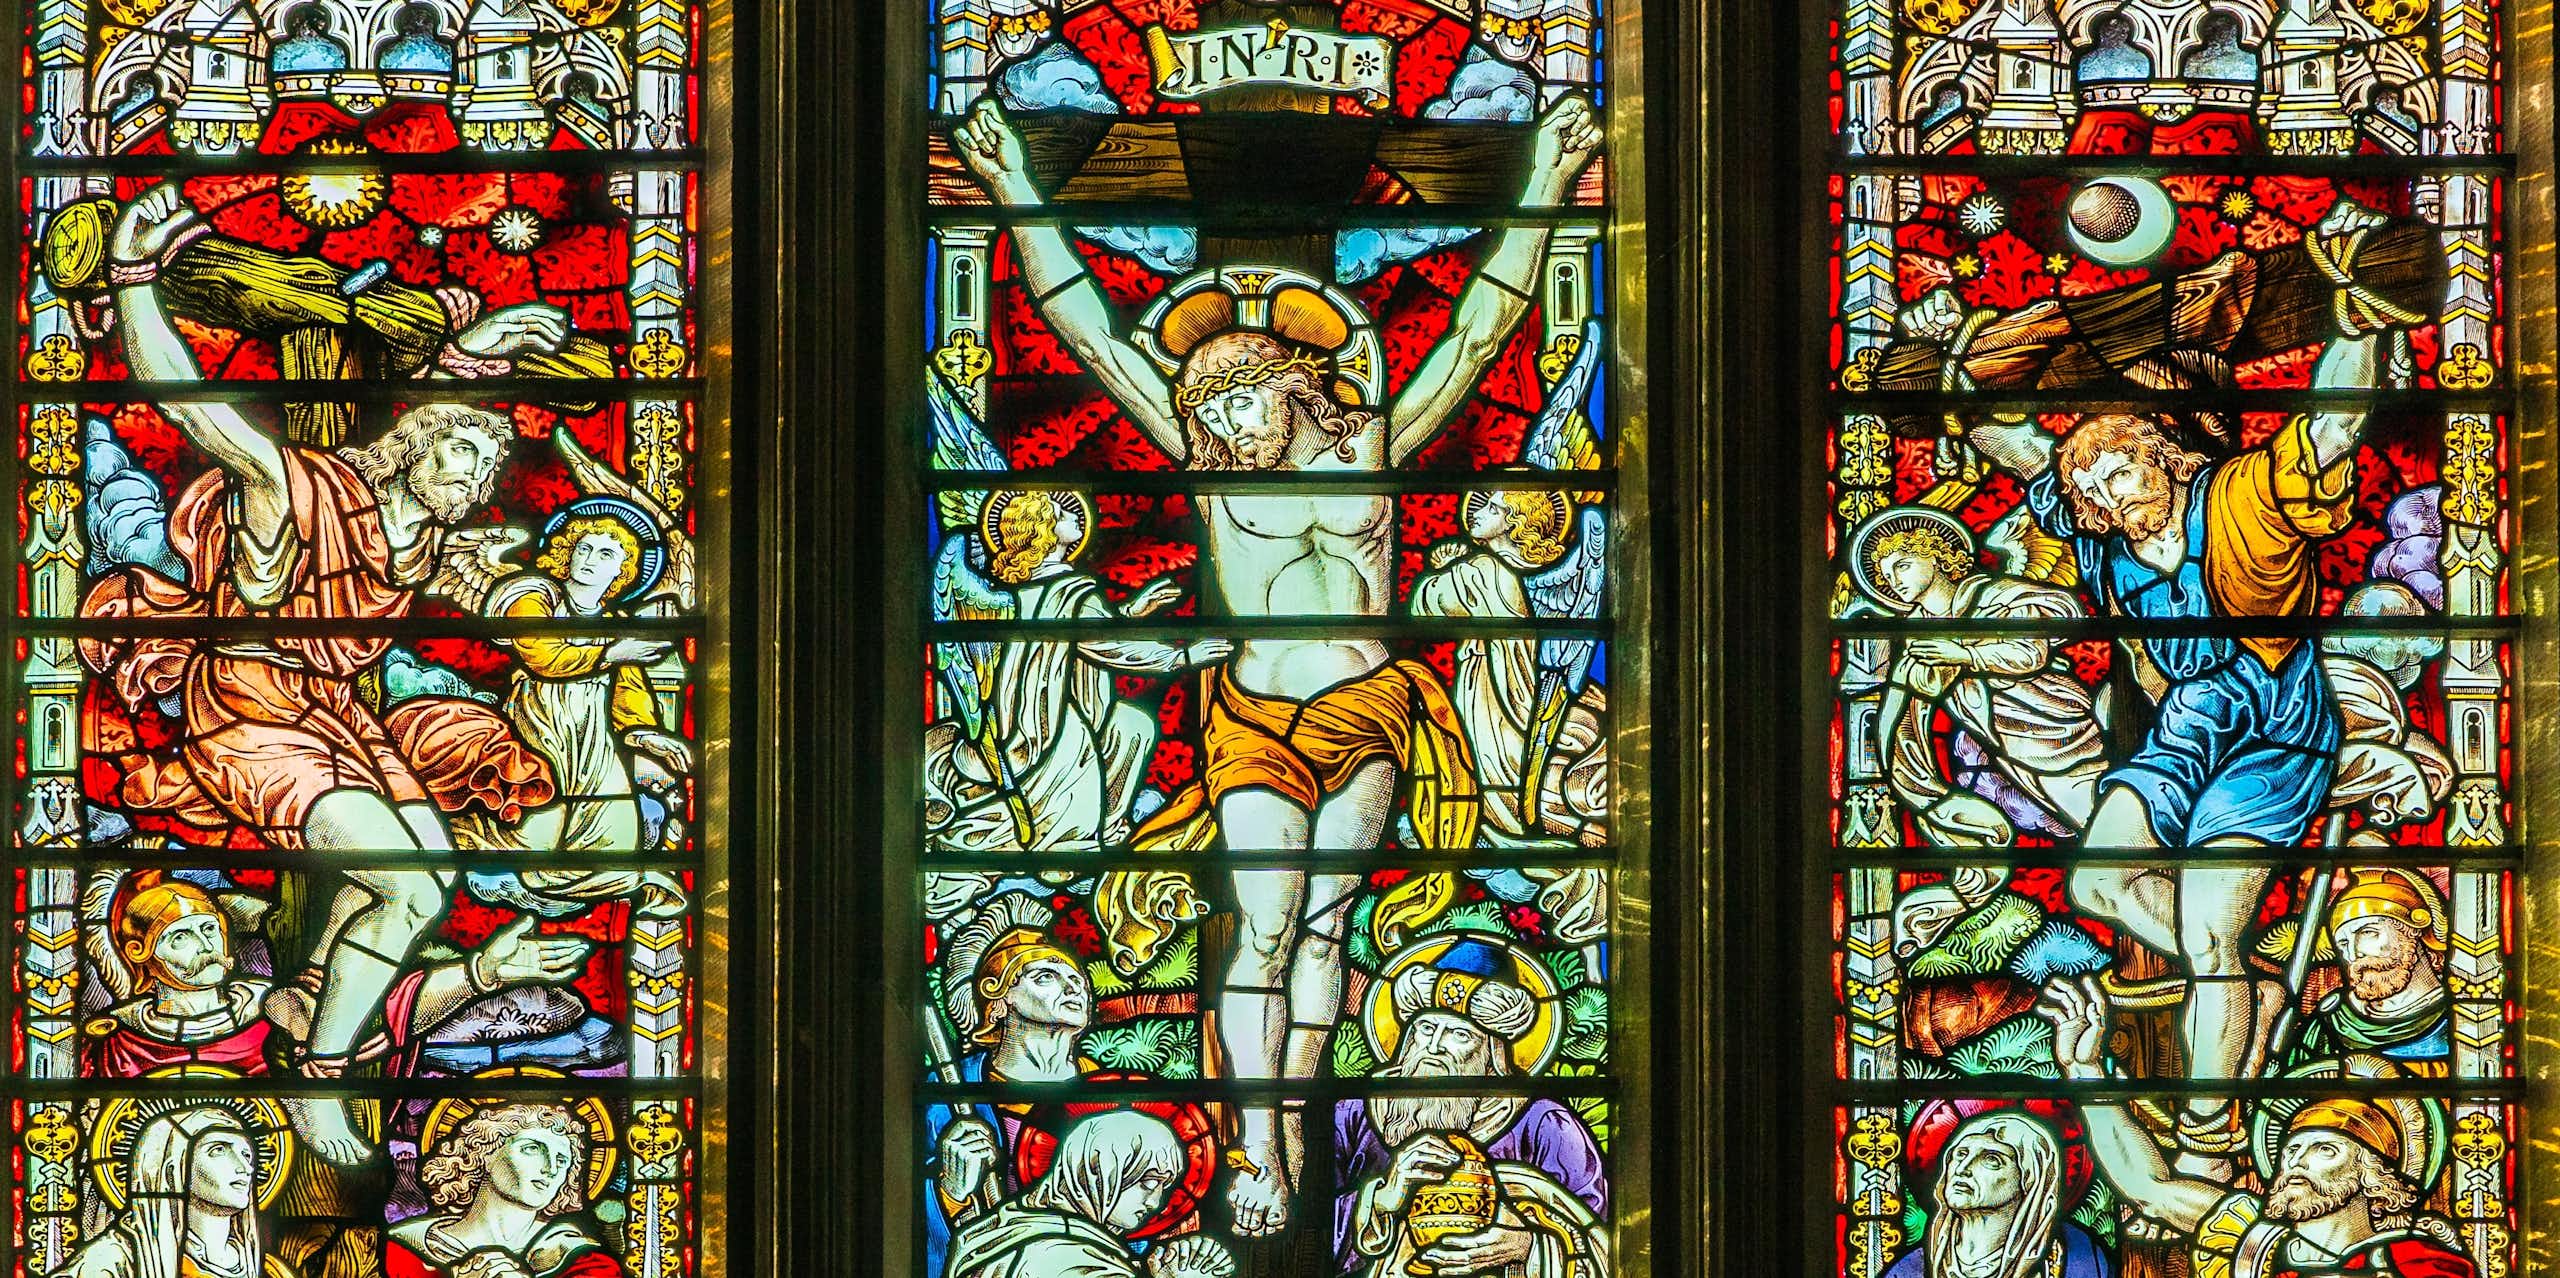 A stained glass window depicting the crucifixion.